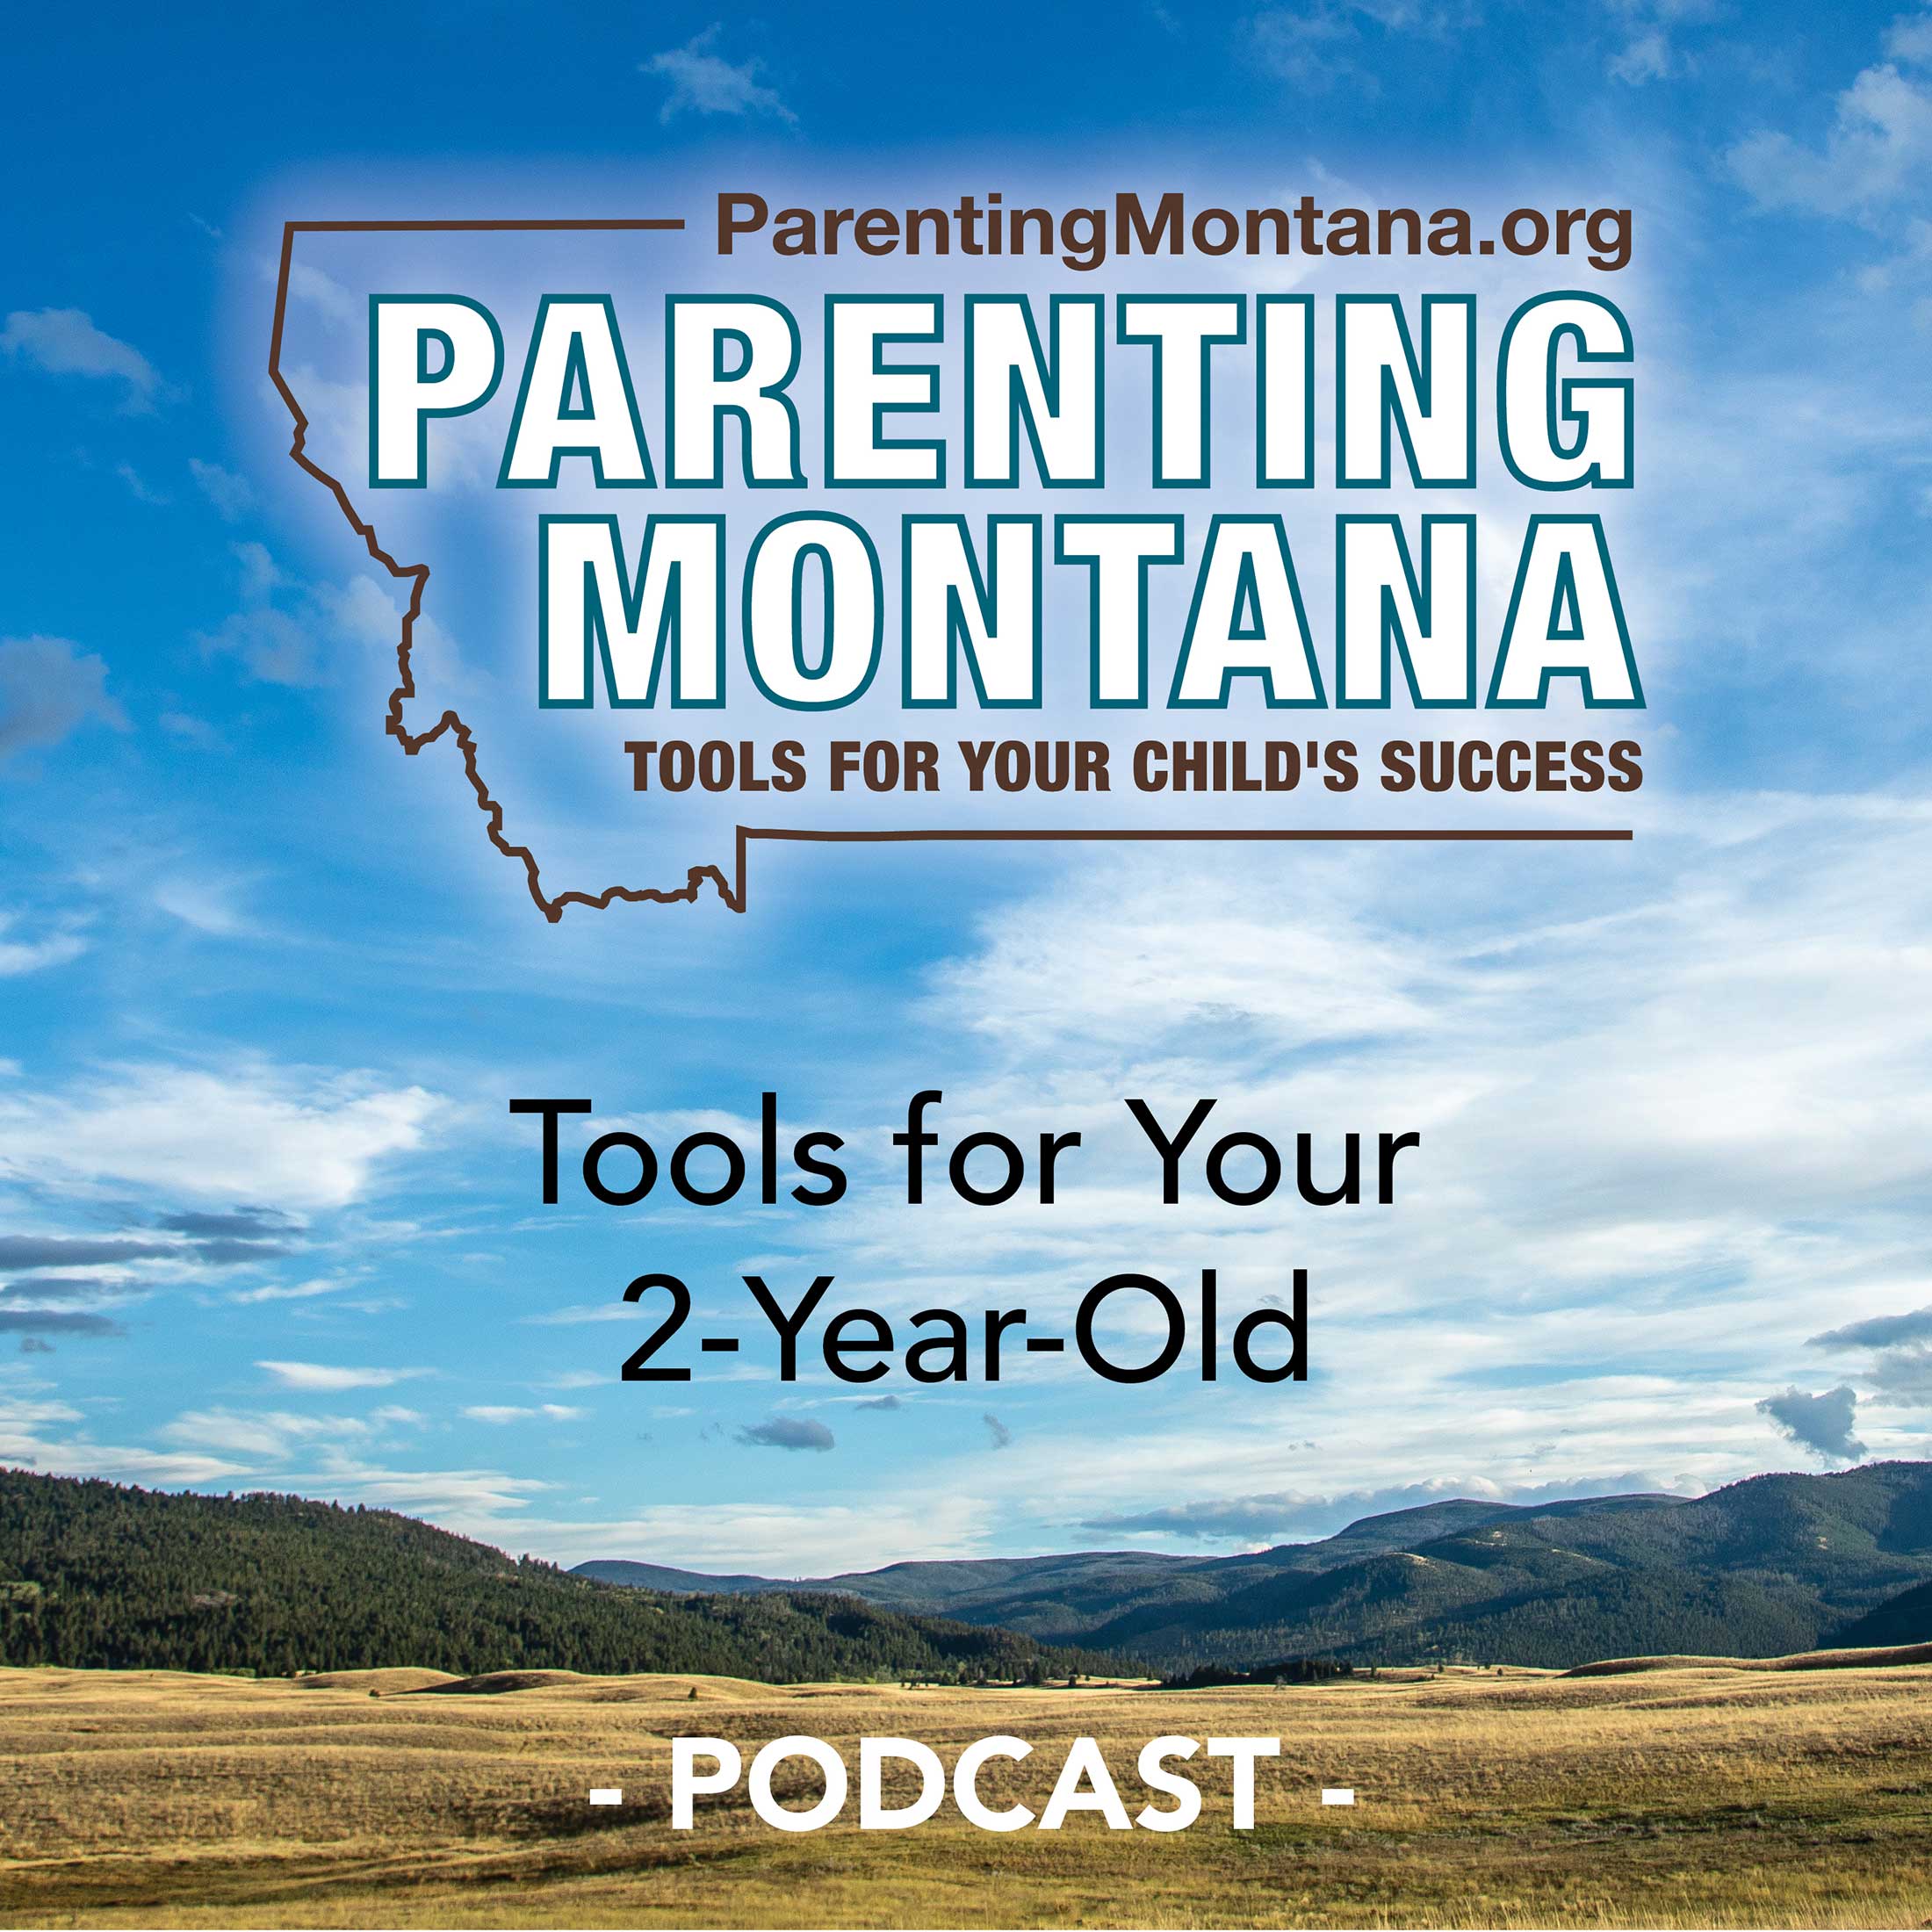 Artwork for podcast 2-Year-Old Parenting Montana Tools